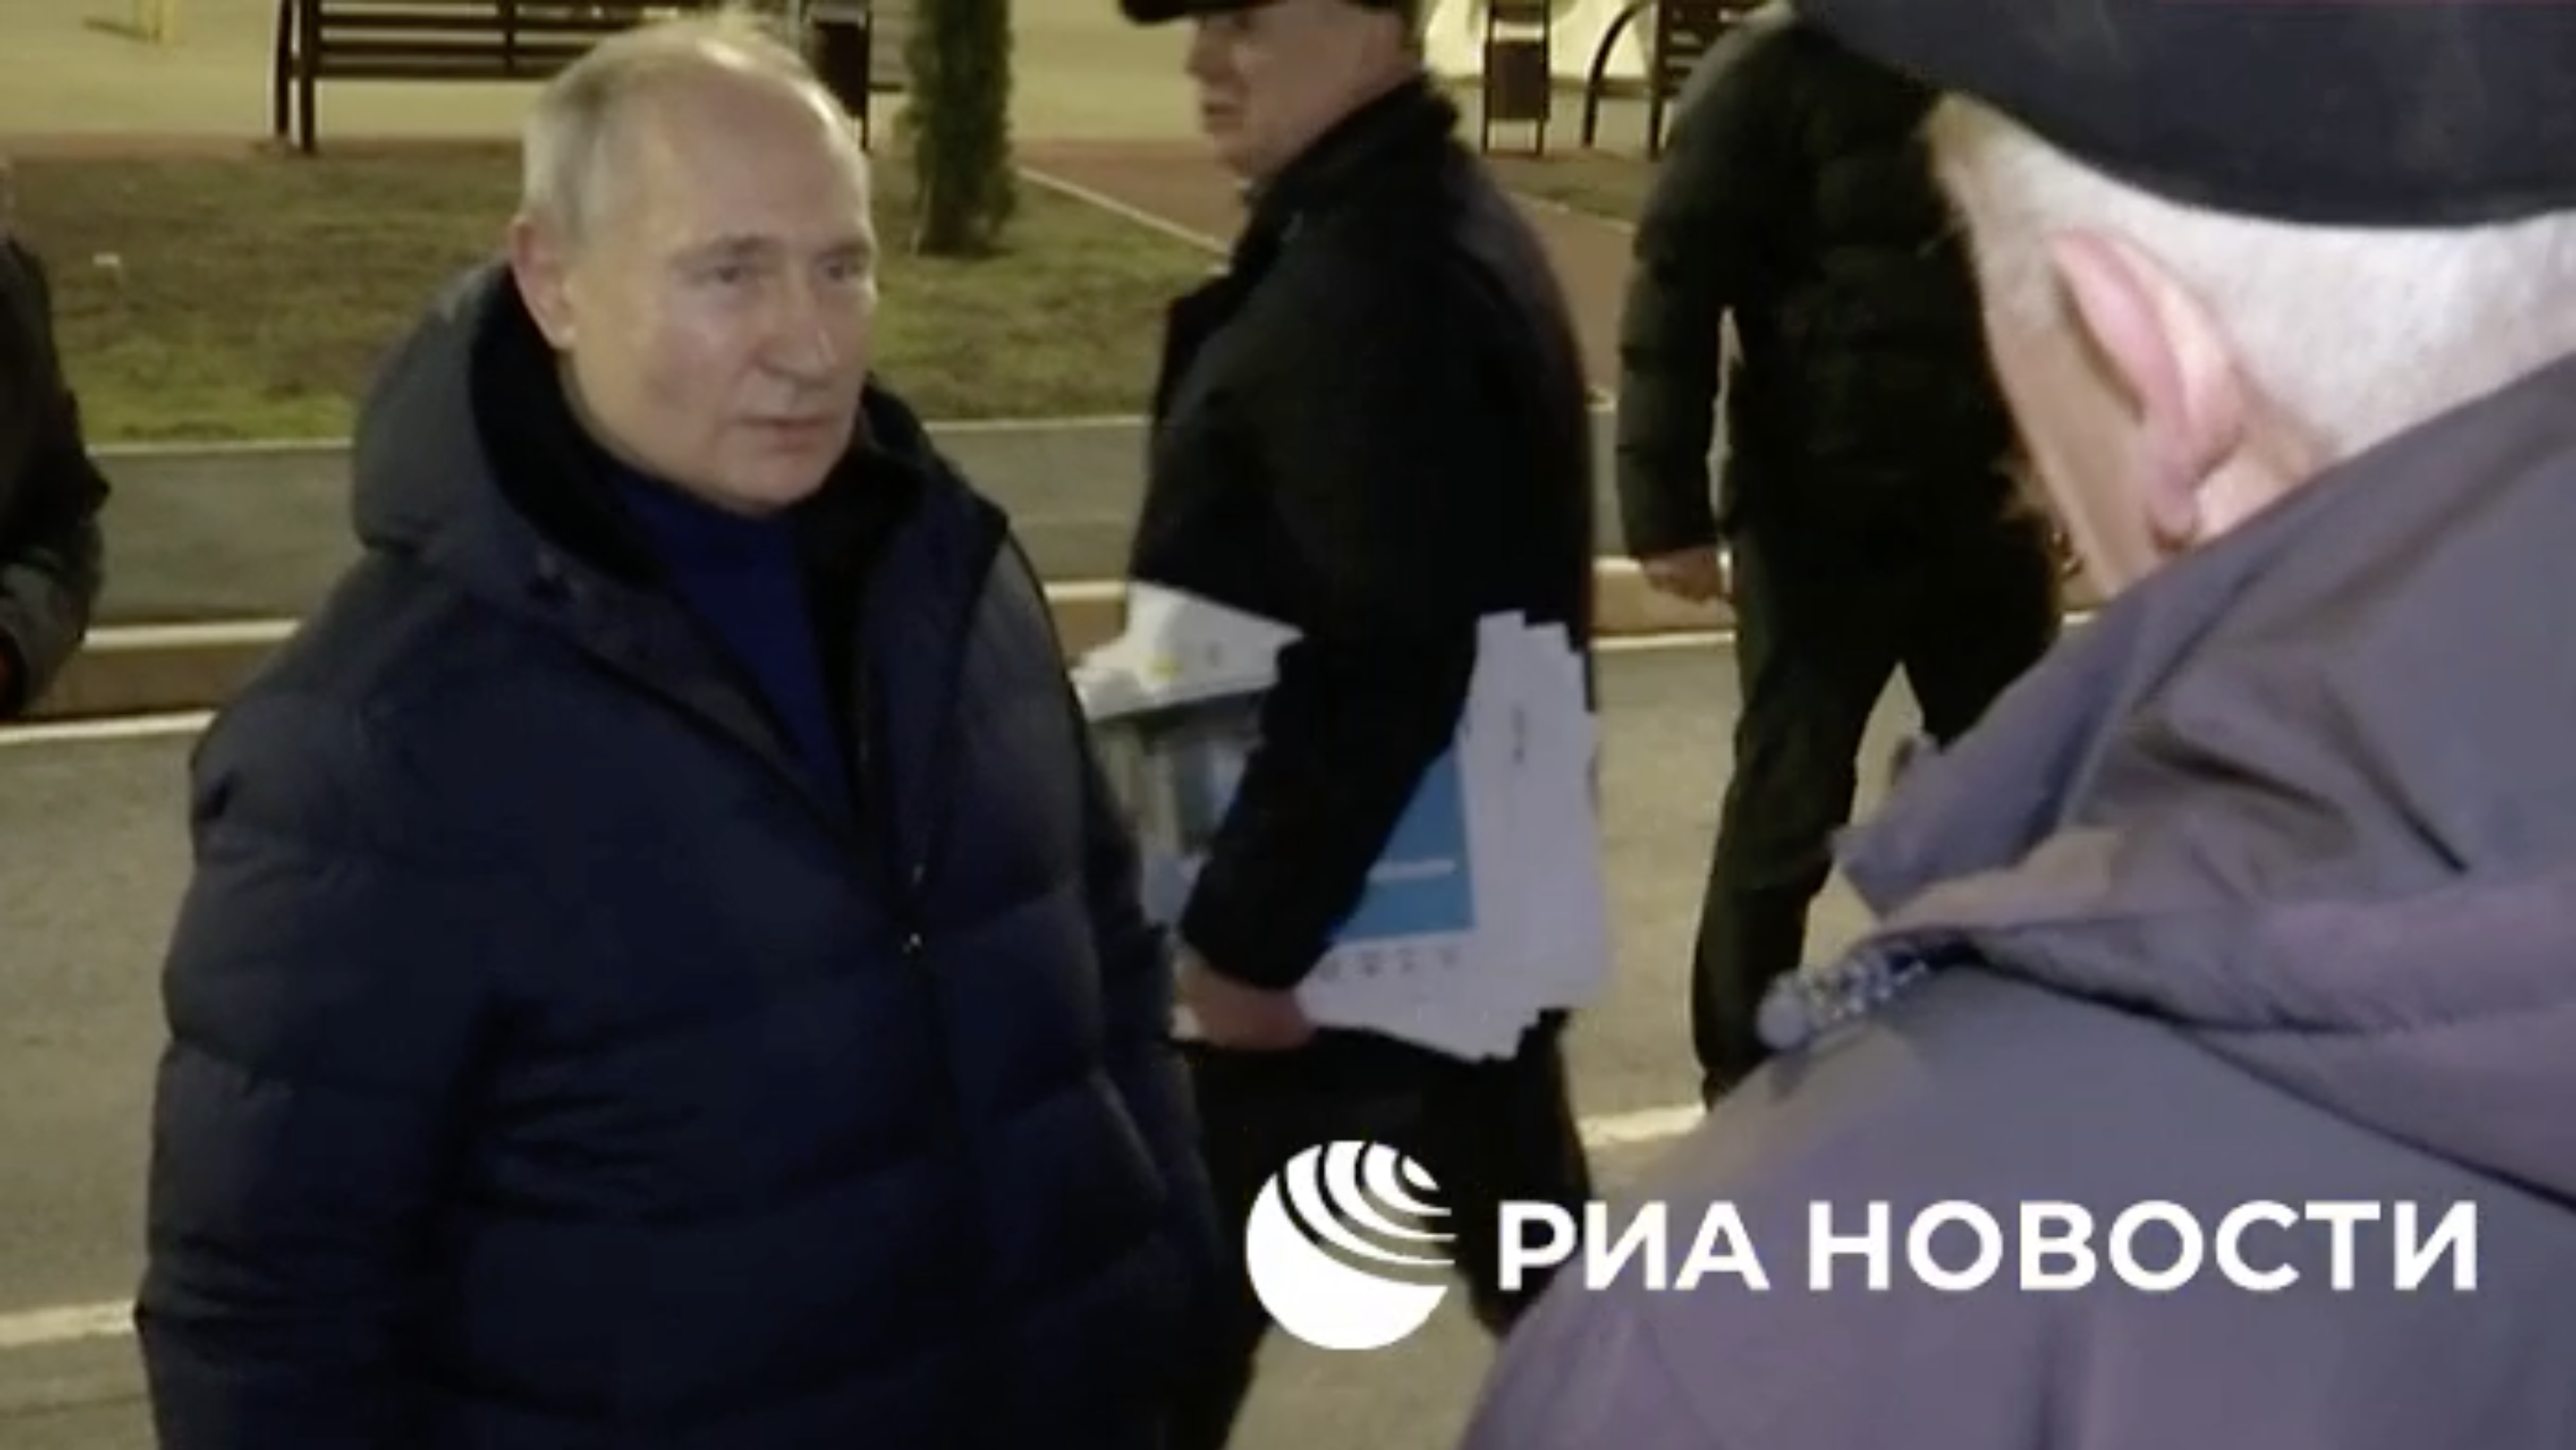 Footage published by RIA Novosti shows Vladmir Putin’s entourage reacting after a woman reportedly yelled “This all is not true! It’s all for a show!” The clip was later edited out by the Kremlin.